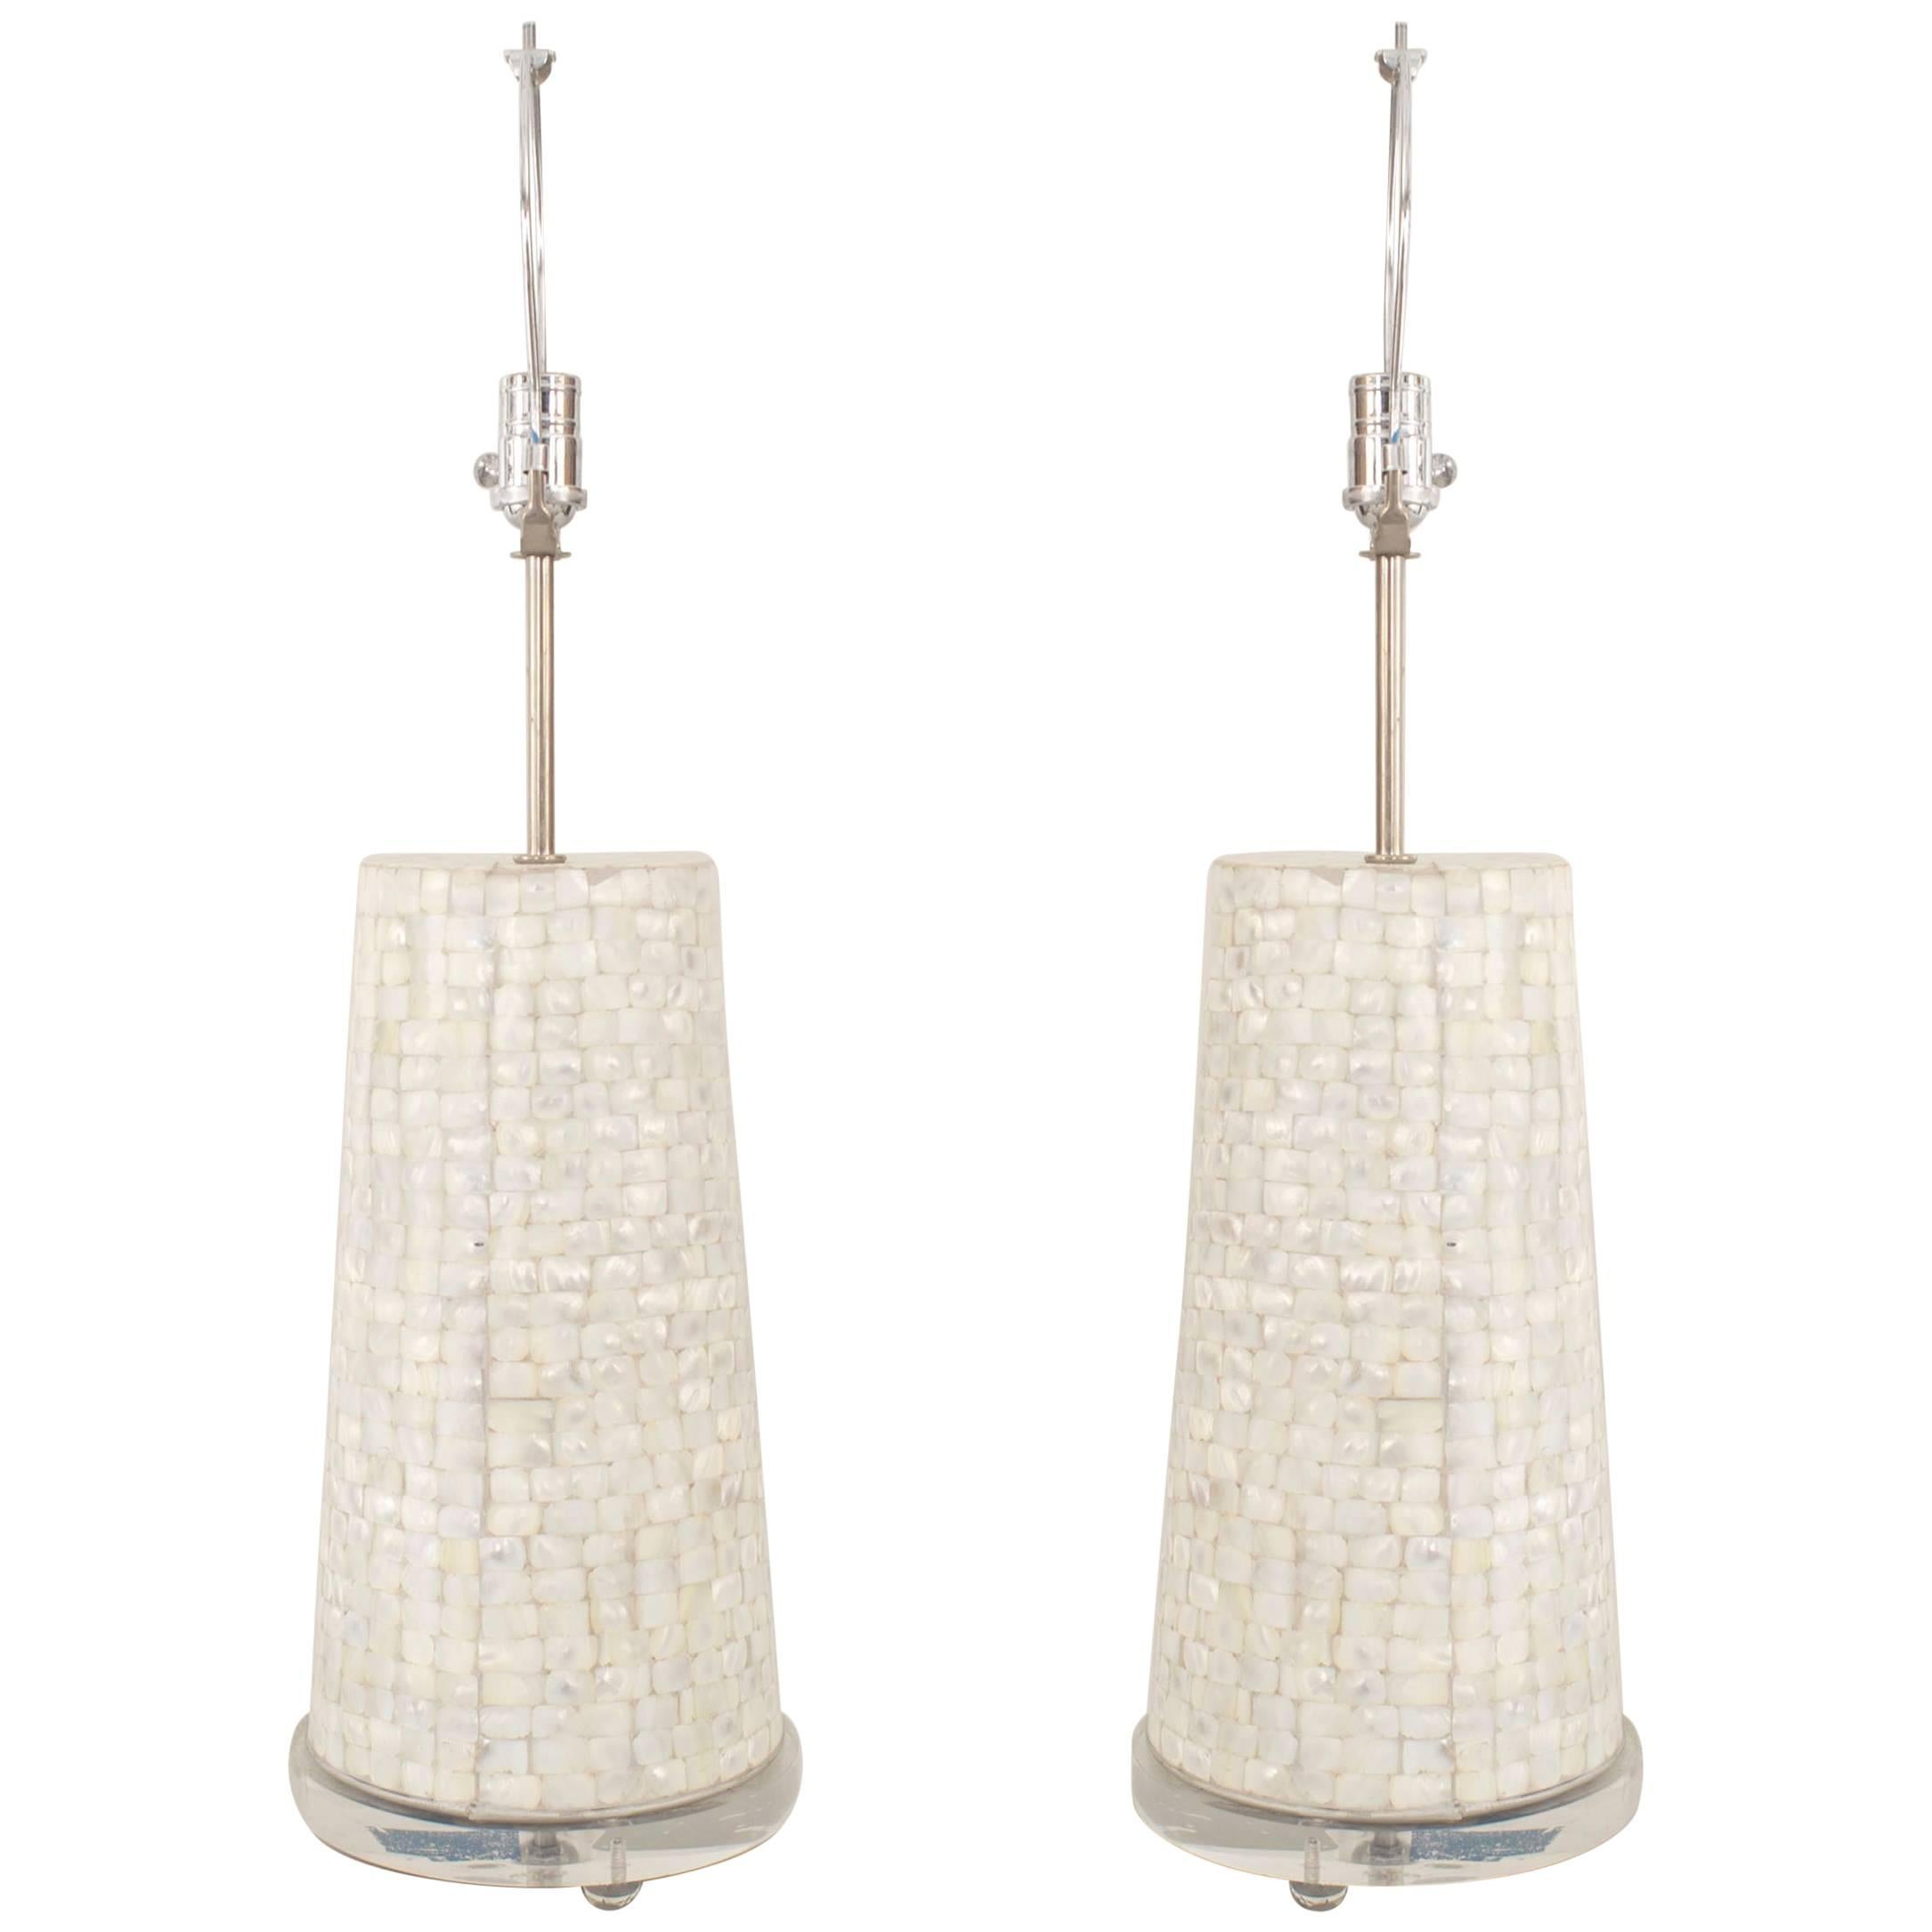 Pair of American Mid-Century Shell and Lucite Table Lamps